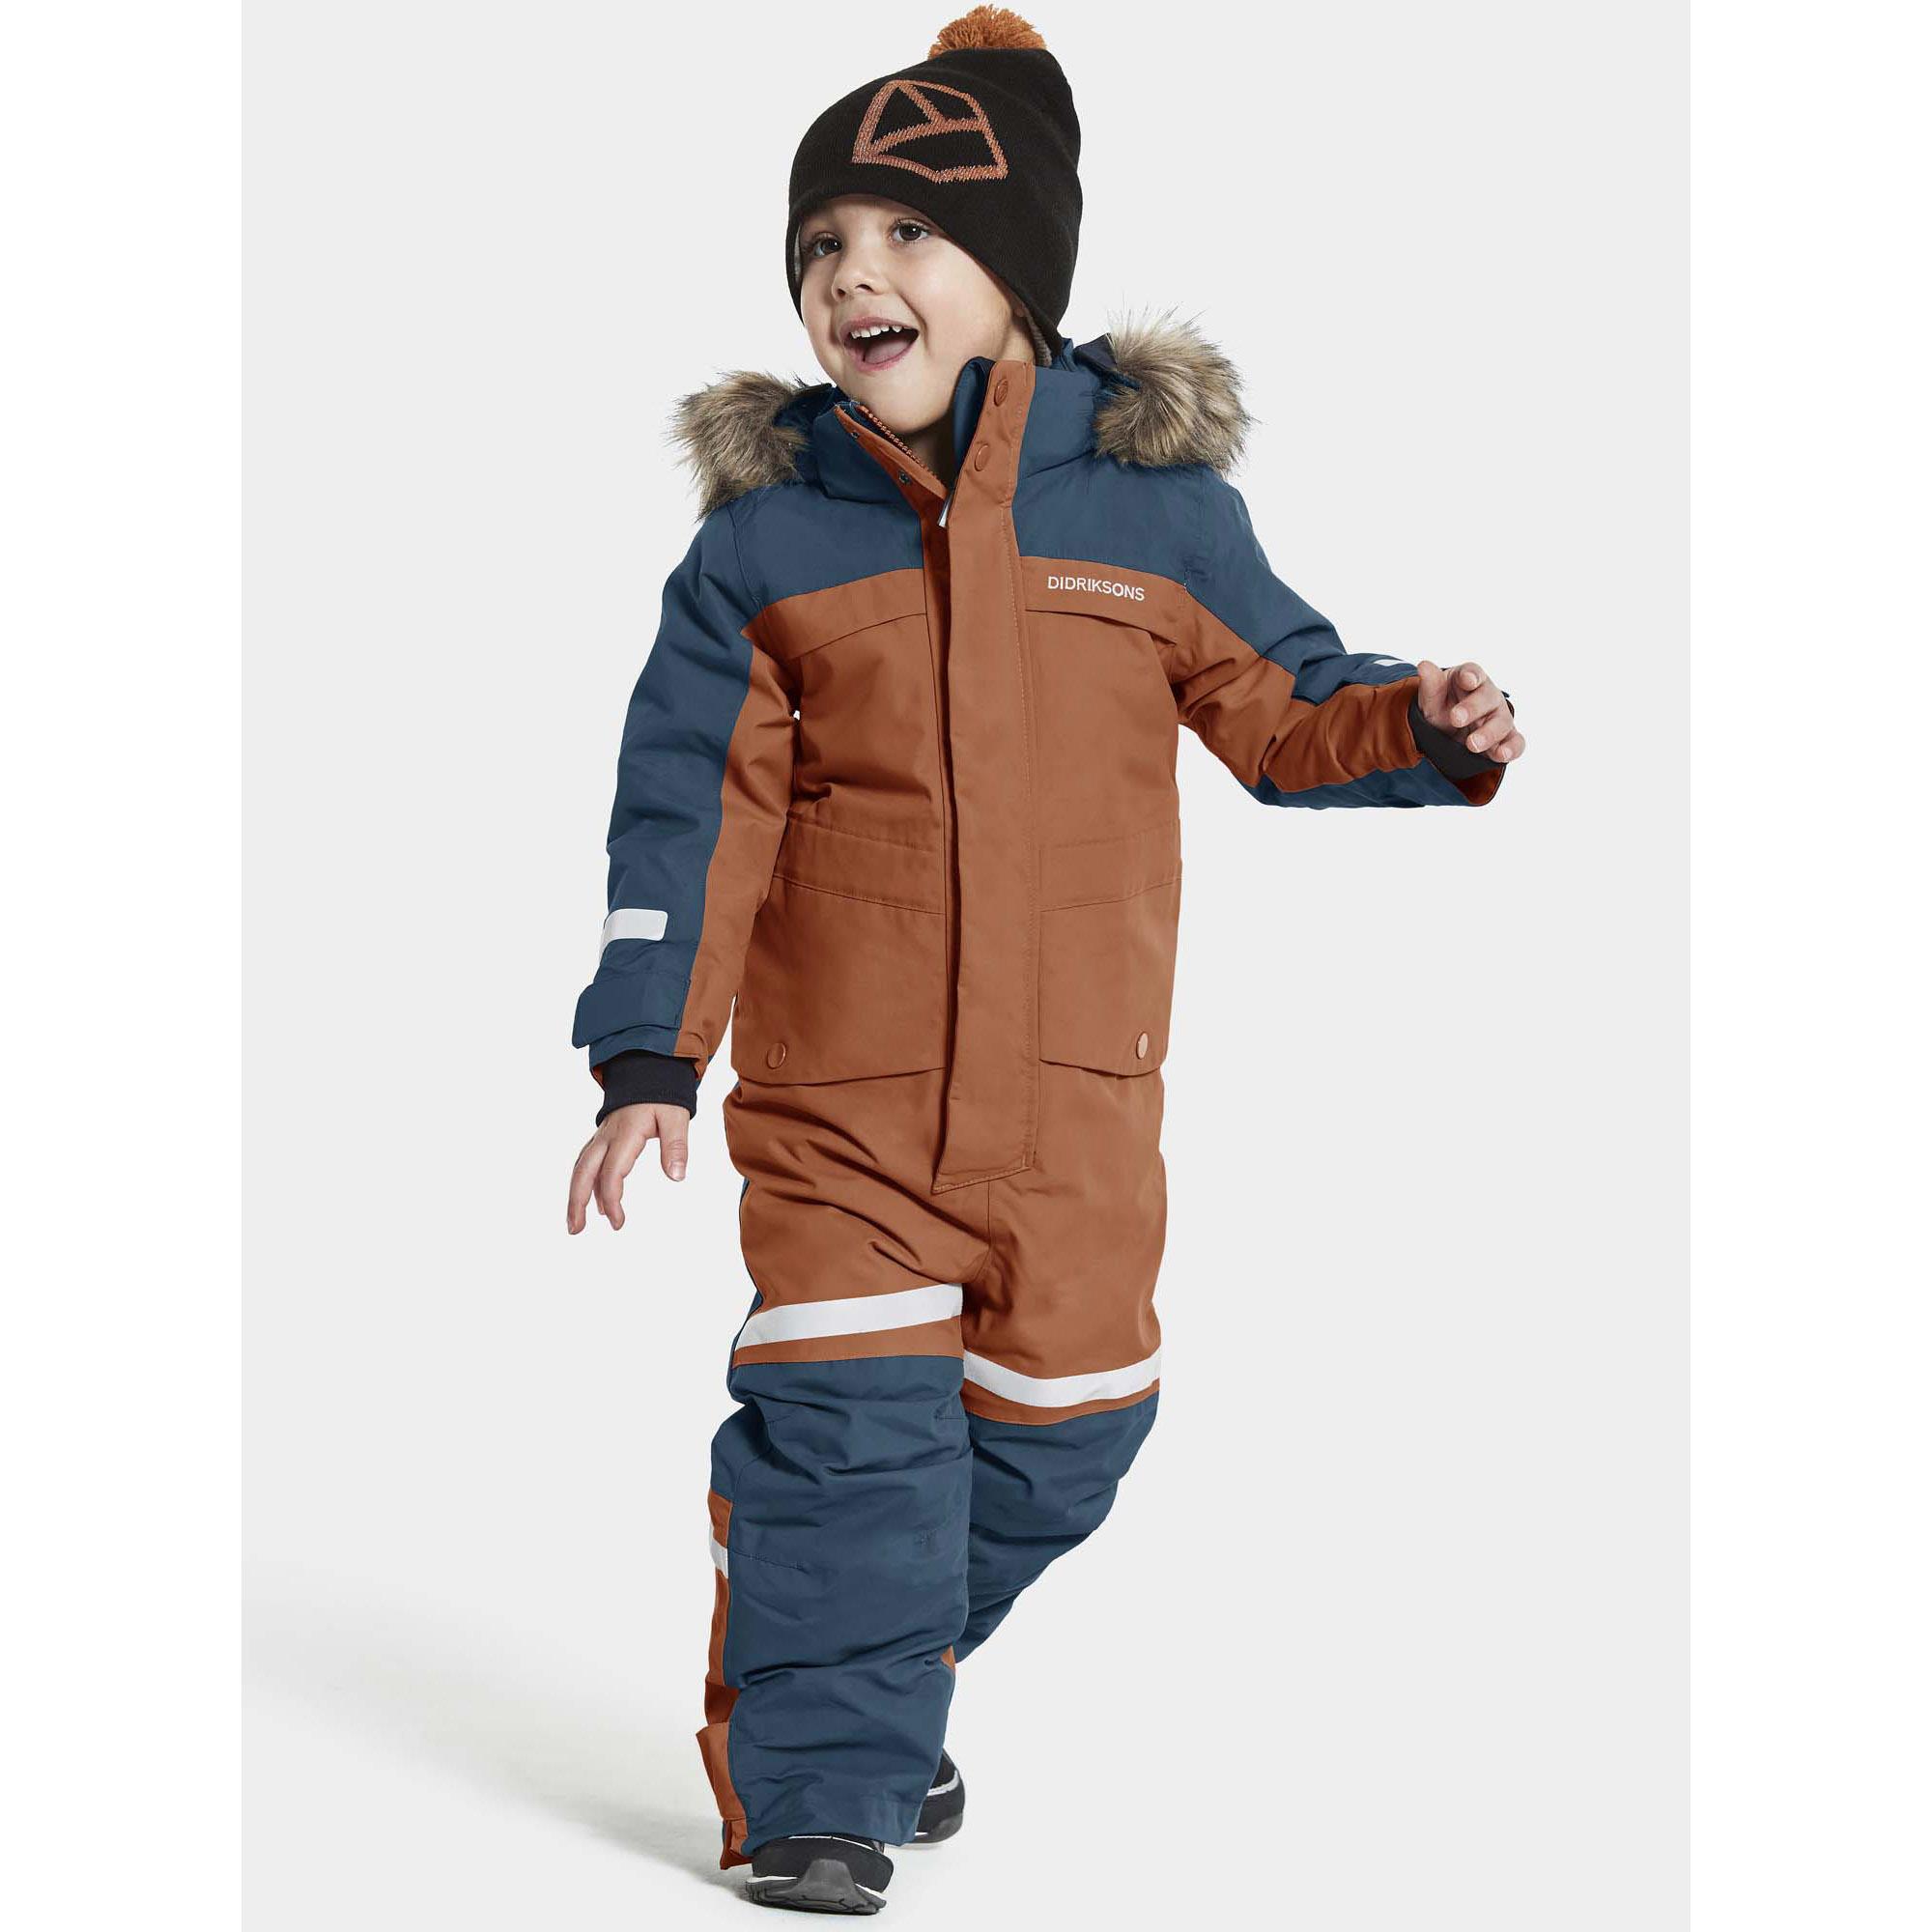 Didriksons Bjarven Kids Coverall